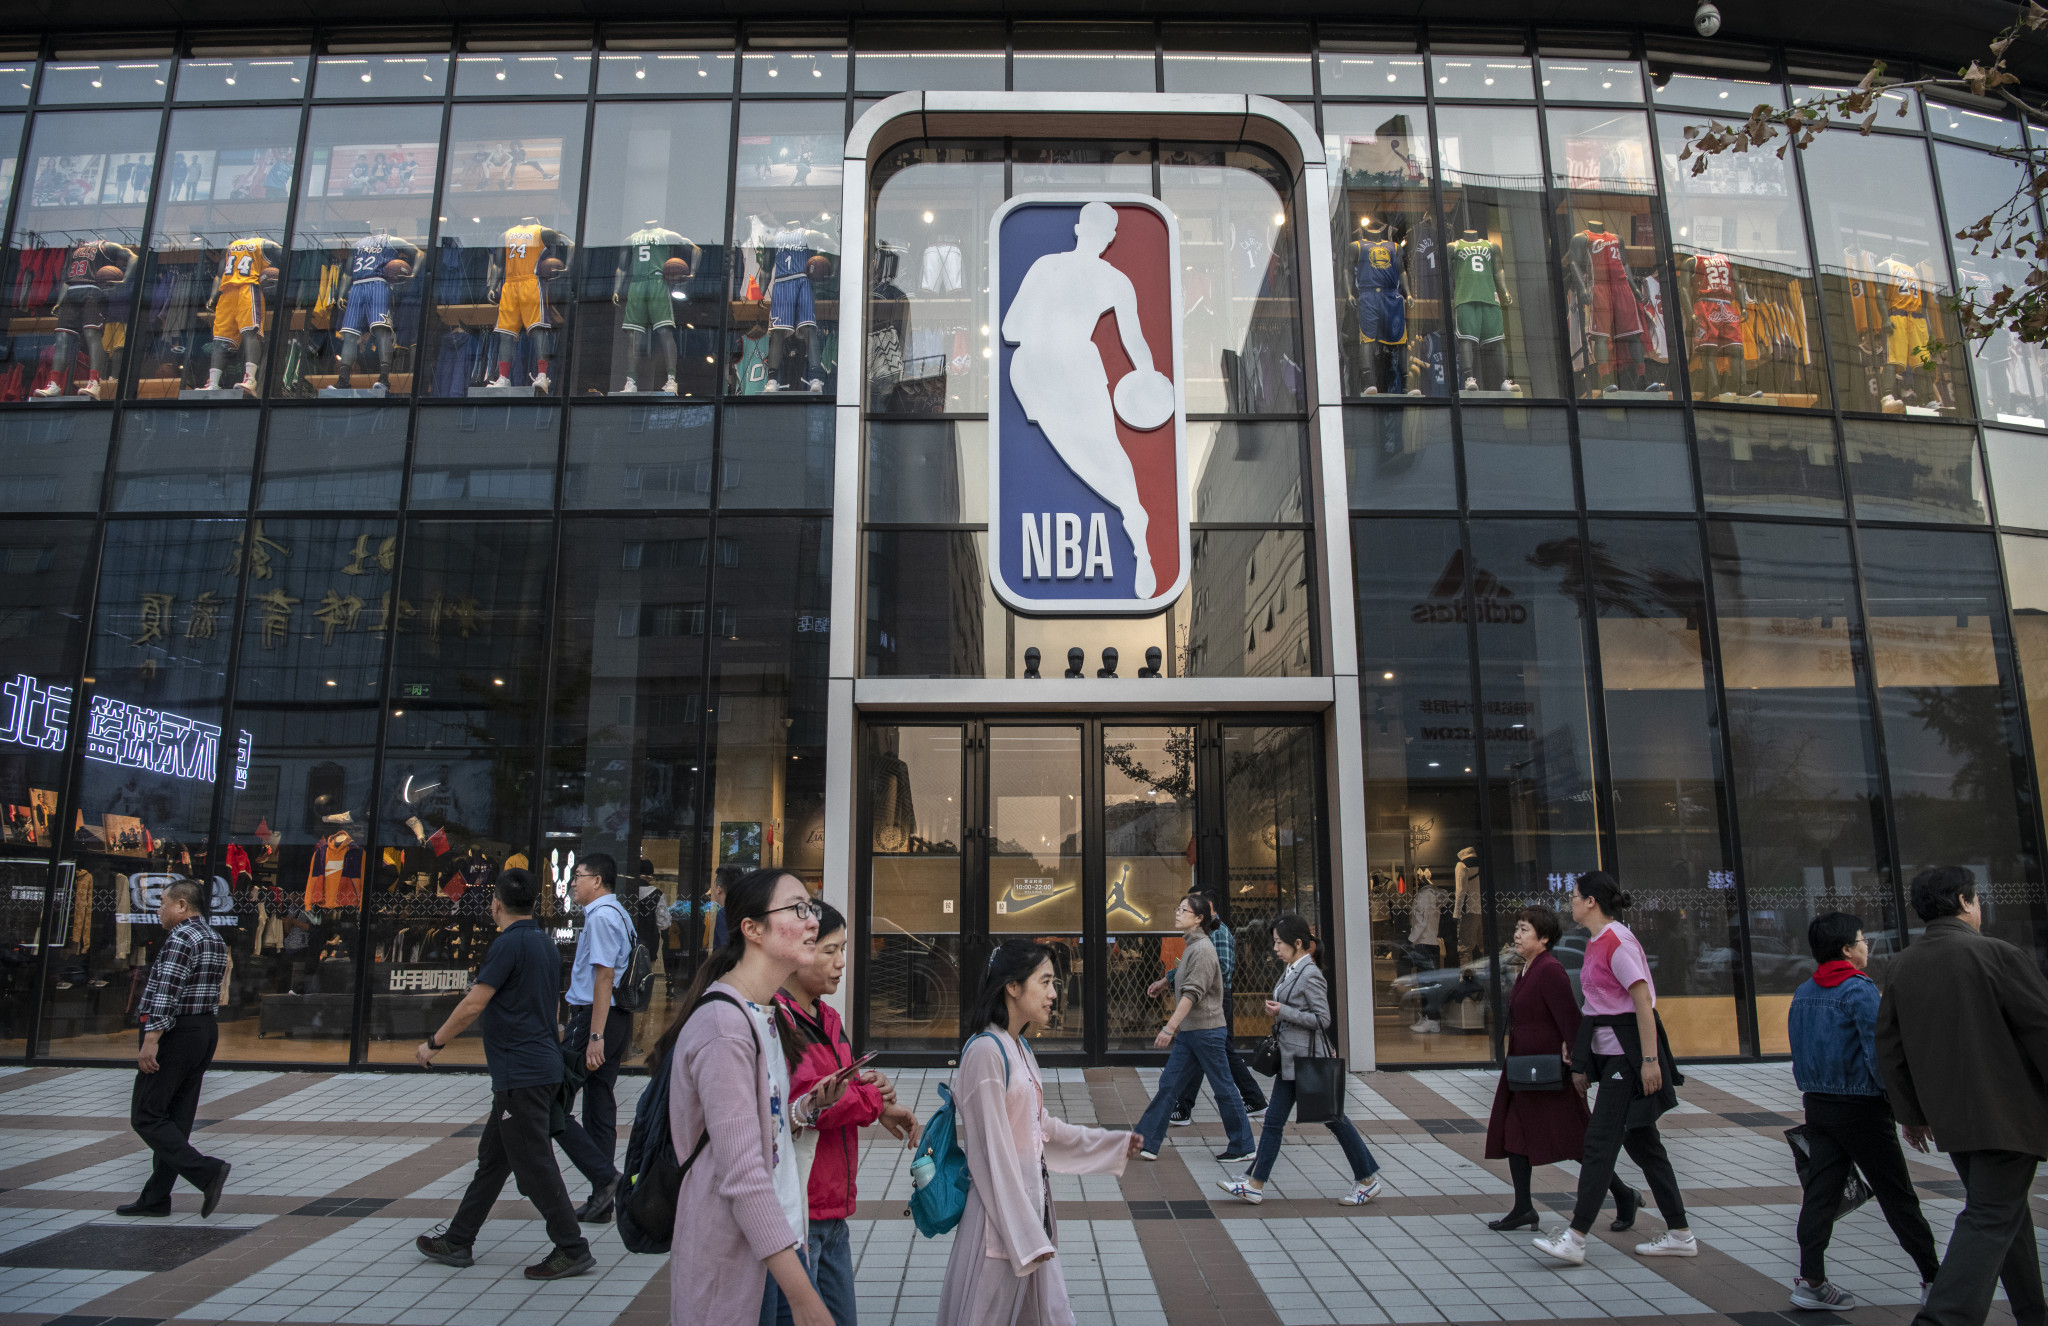 NBA China chief executive Chang to leave role on May 15